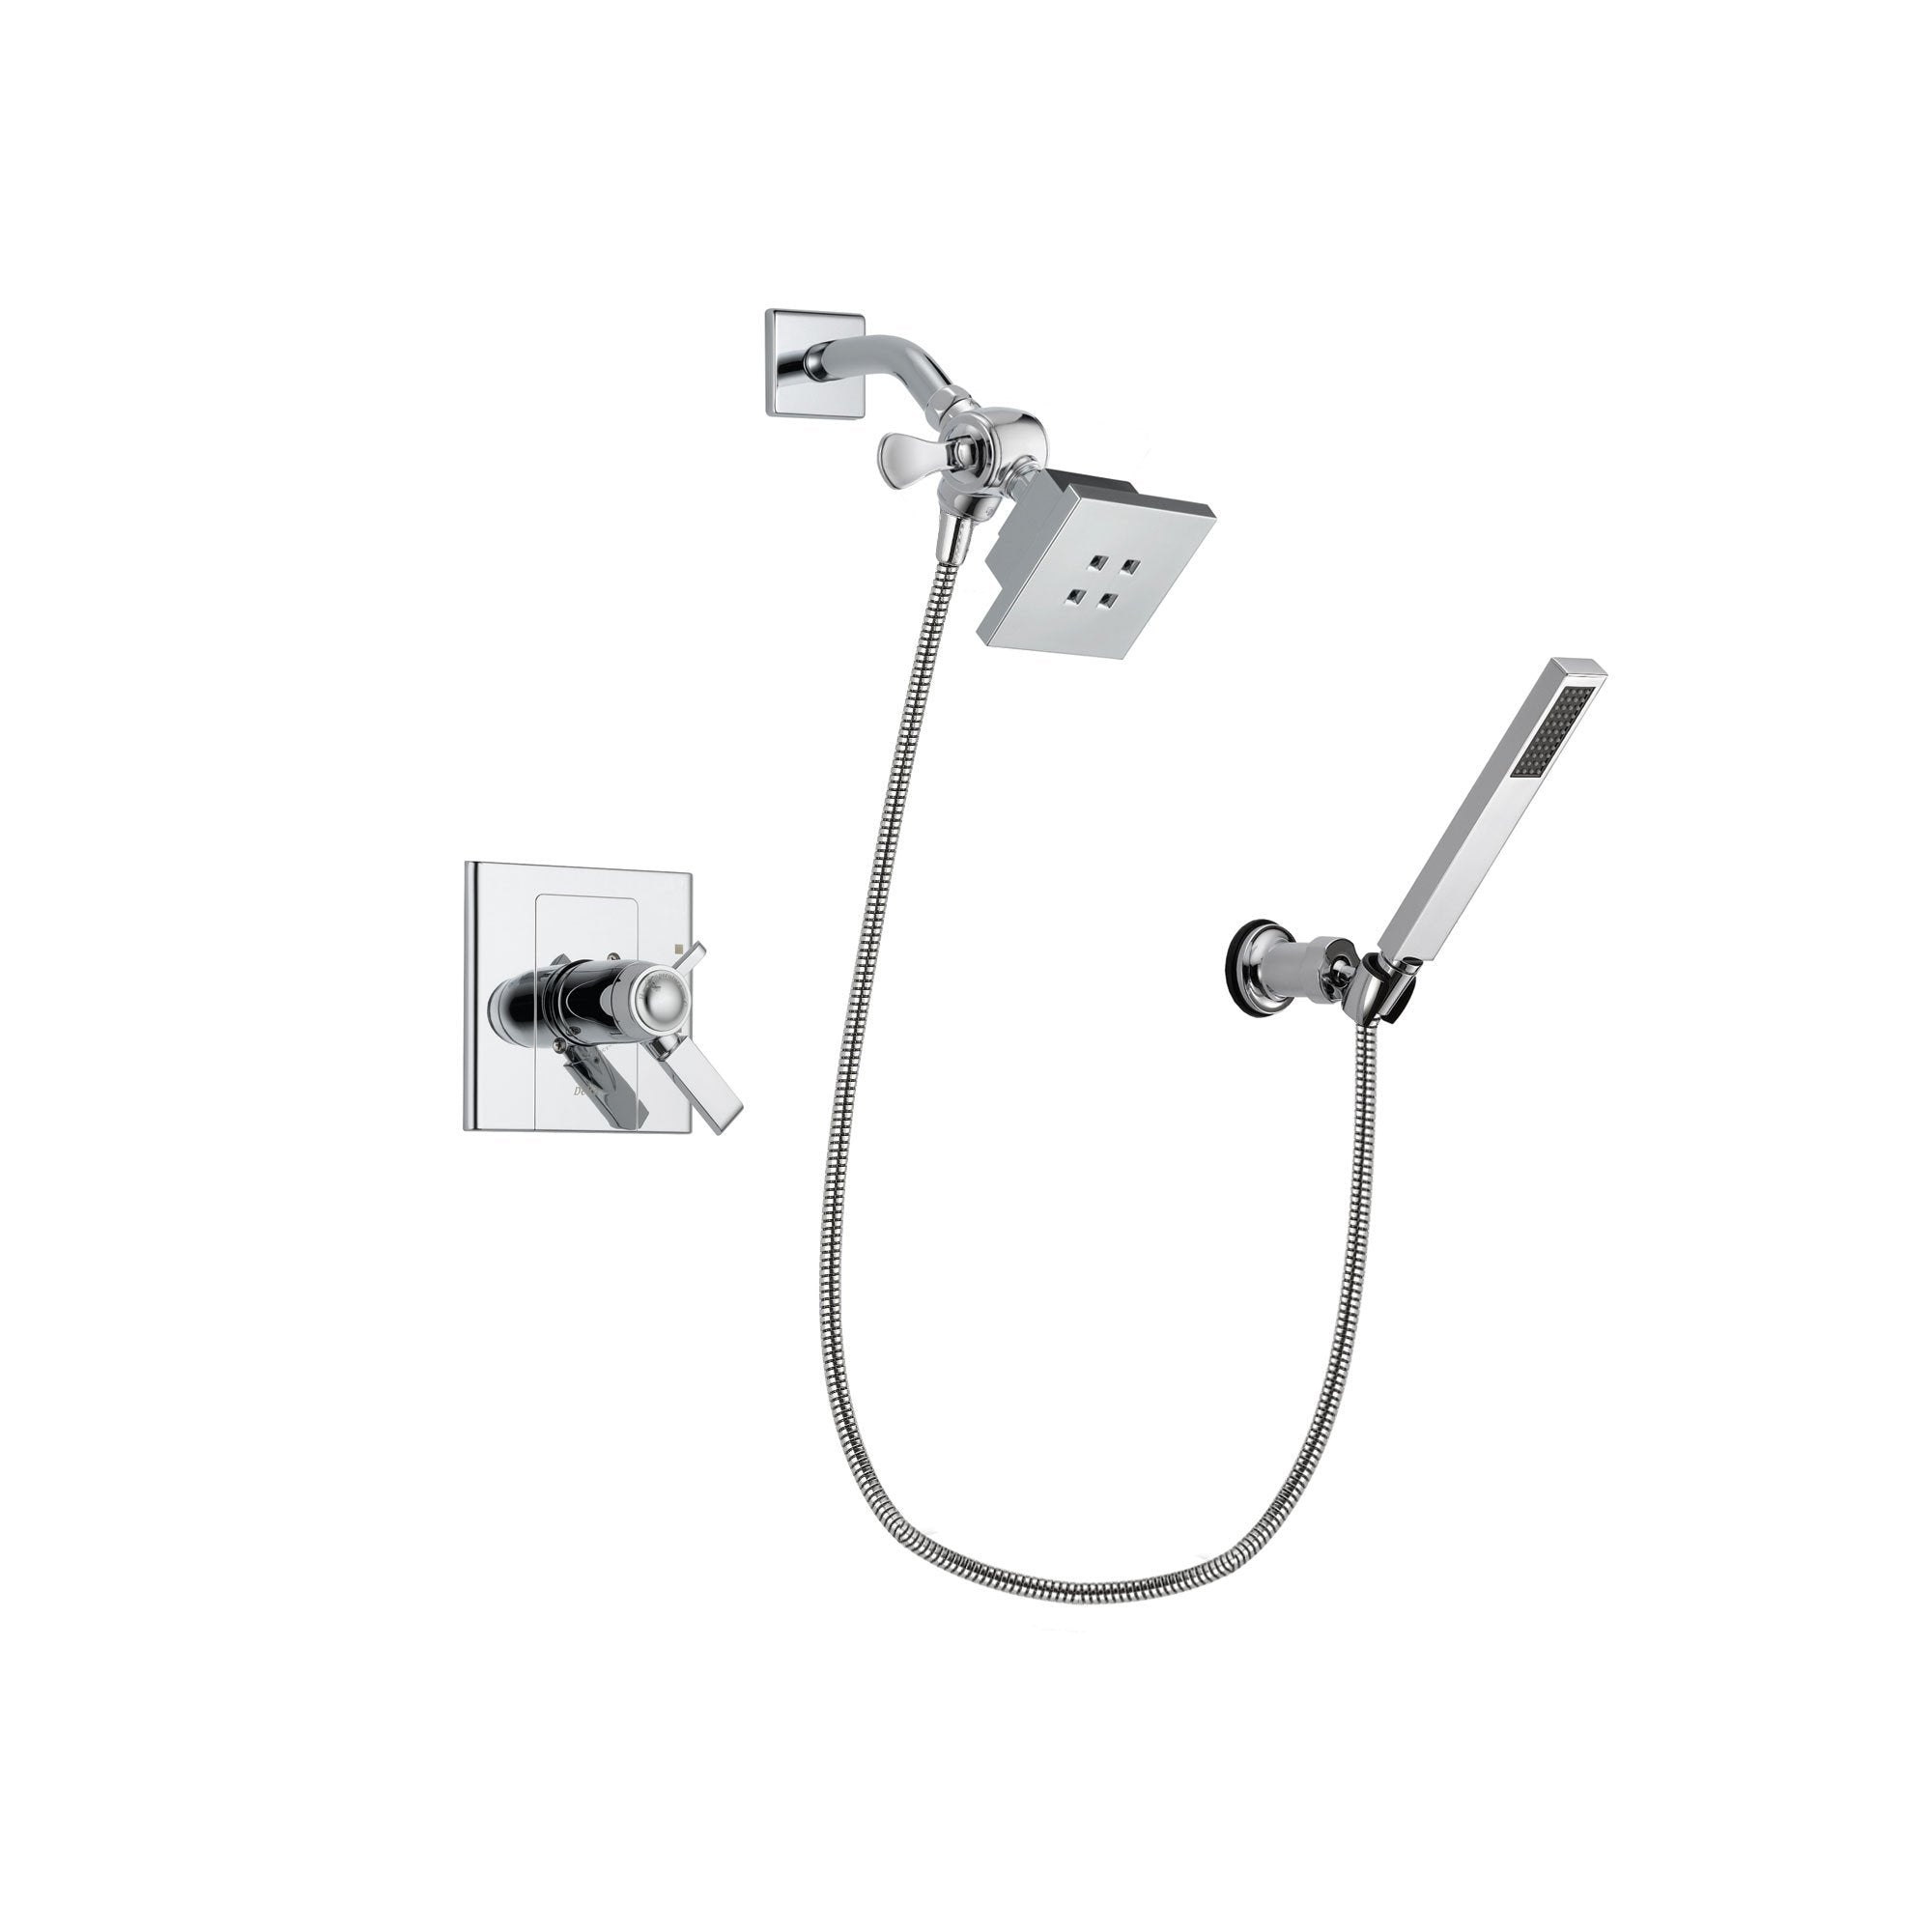 Delta Arzo Chrome Finish Thermostatic Shower Faucet System Package with Square Showerhead and Modern Handheld Shower Spray with Wall Bracket and Hose Includes Rough-in Valve DSP0101V